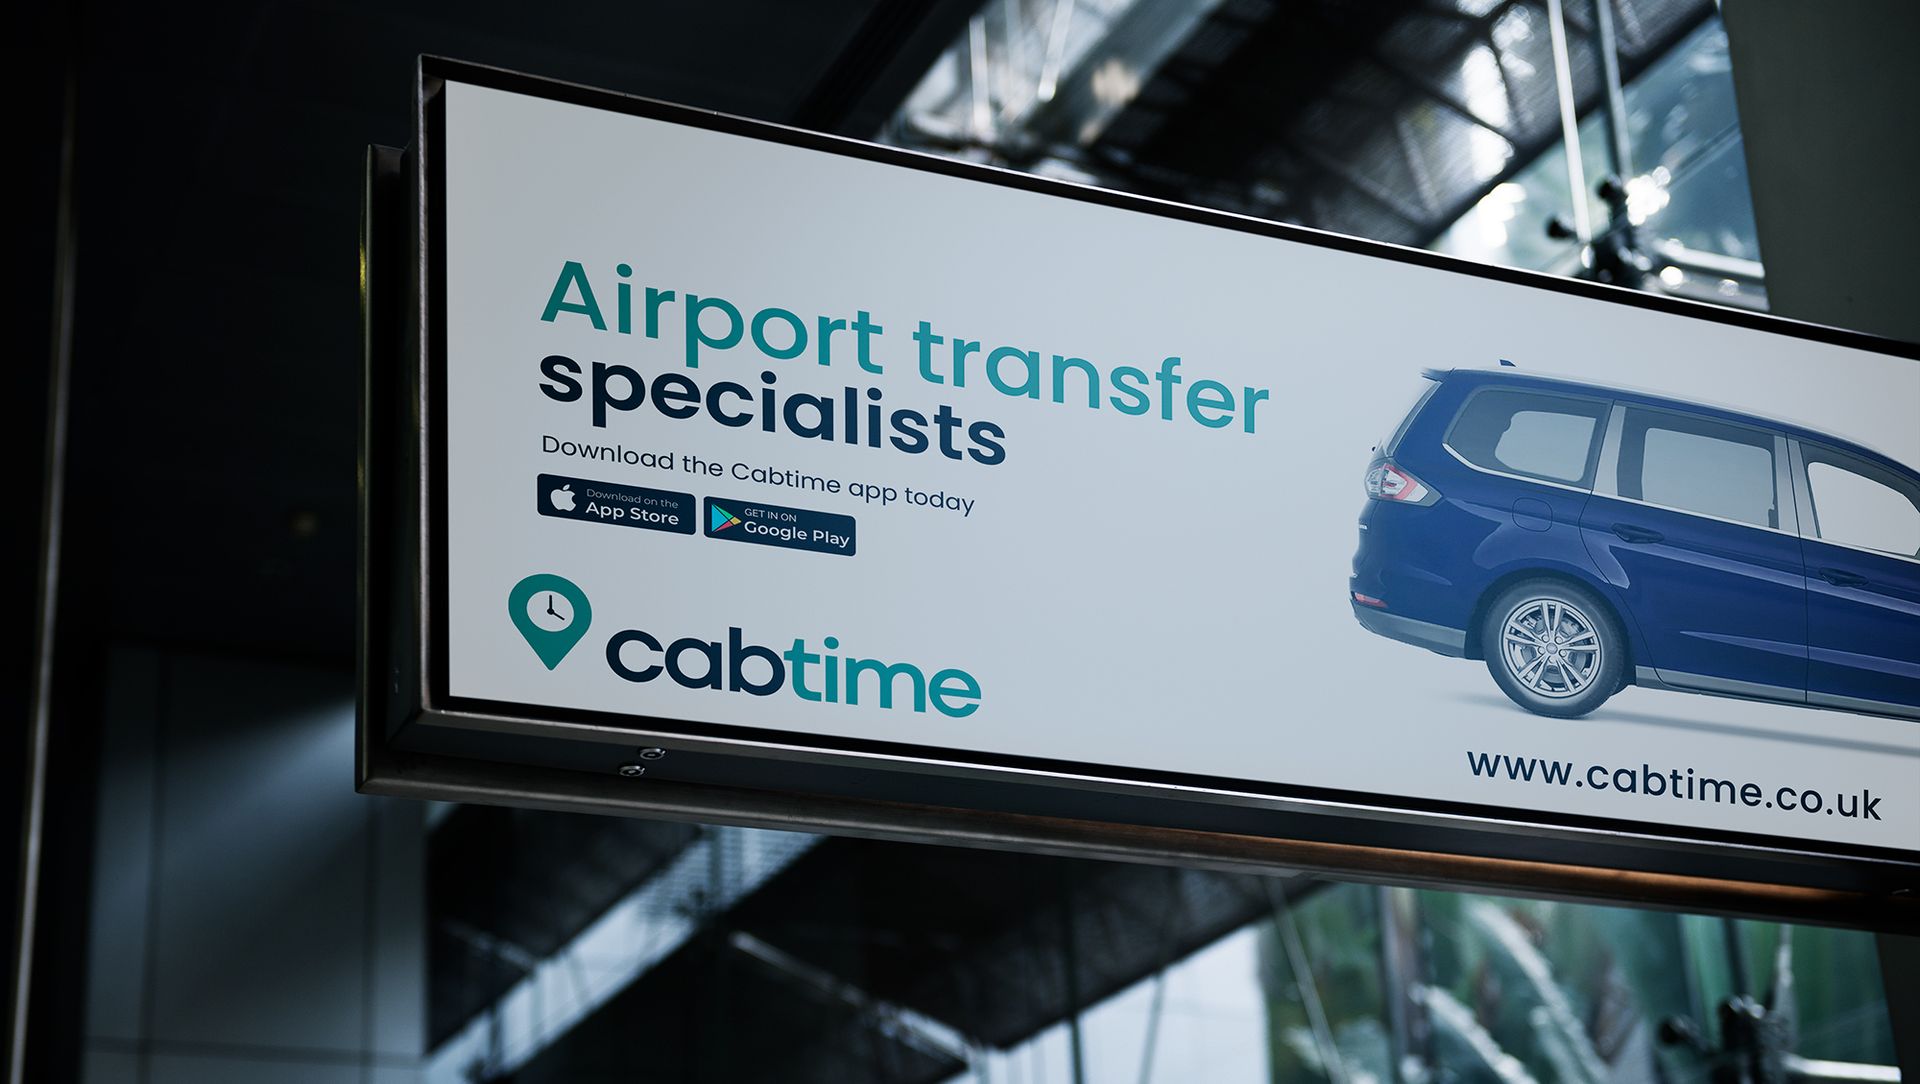 A  billboard advertising airport transfer specialists CabTime